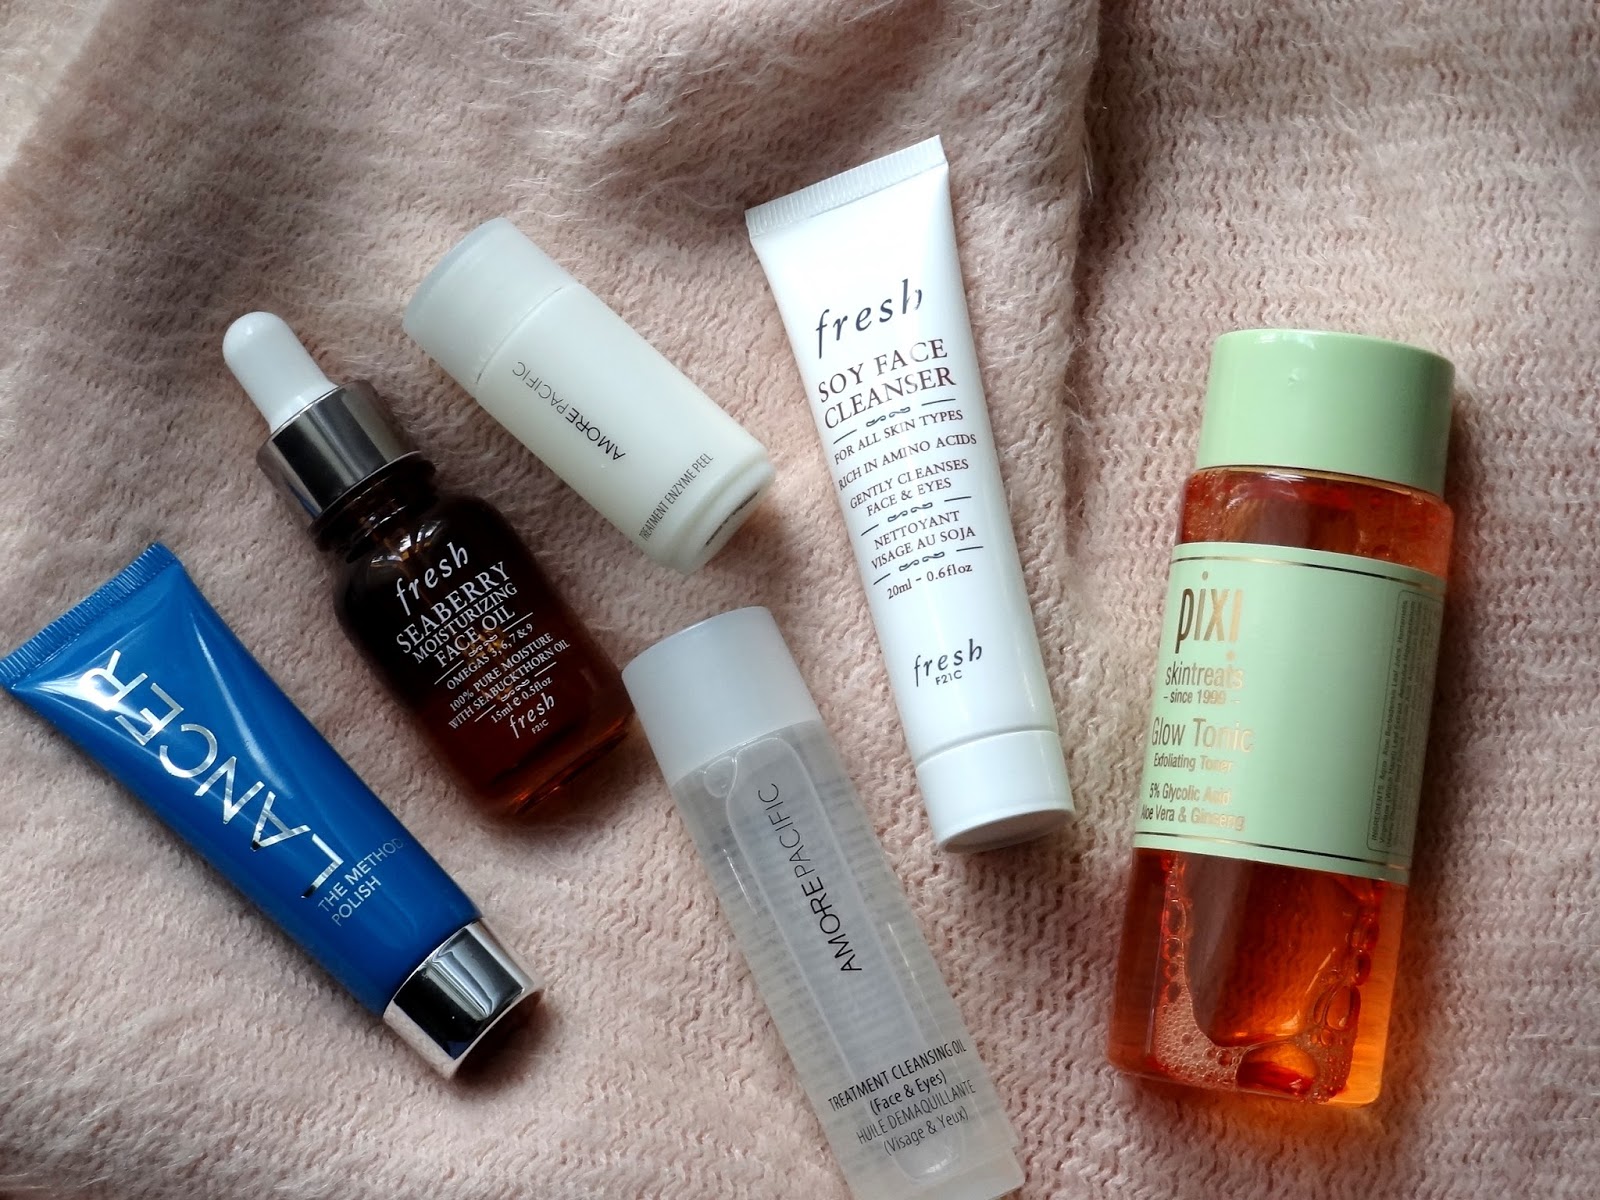 Makeup, Beauty and More: Skincare Minis With Quick Reviews